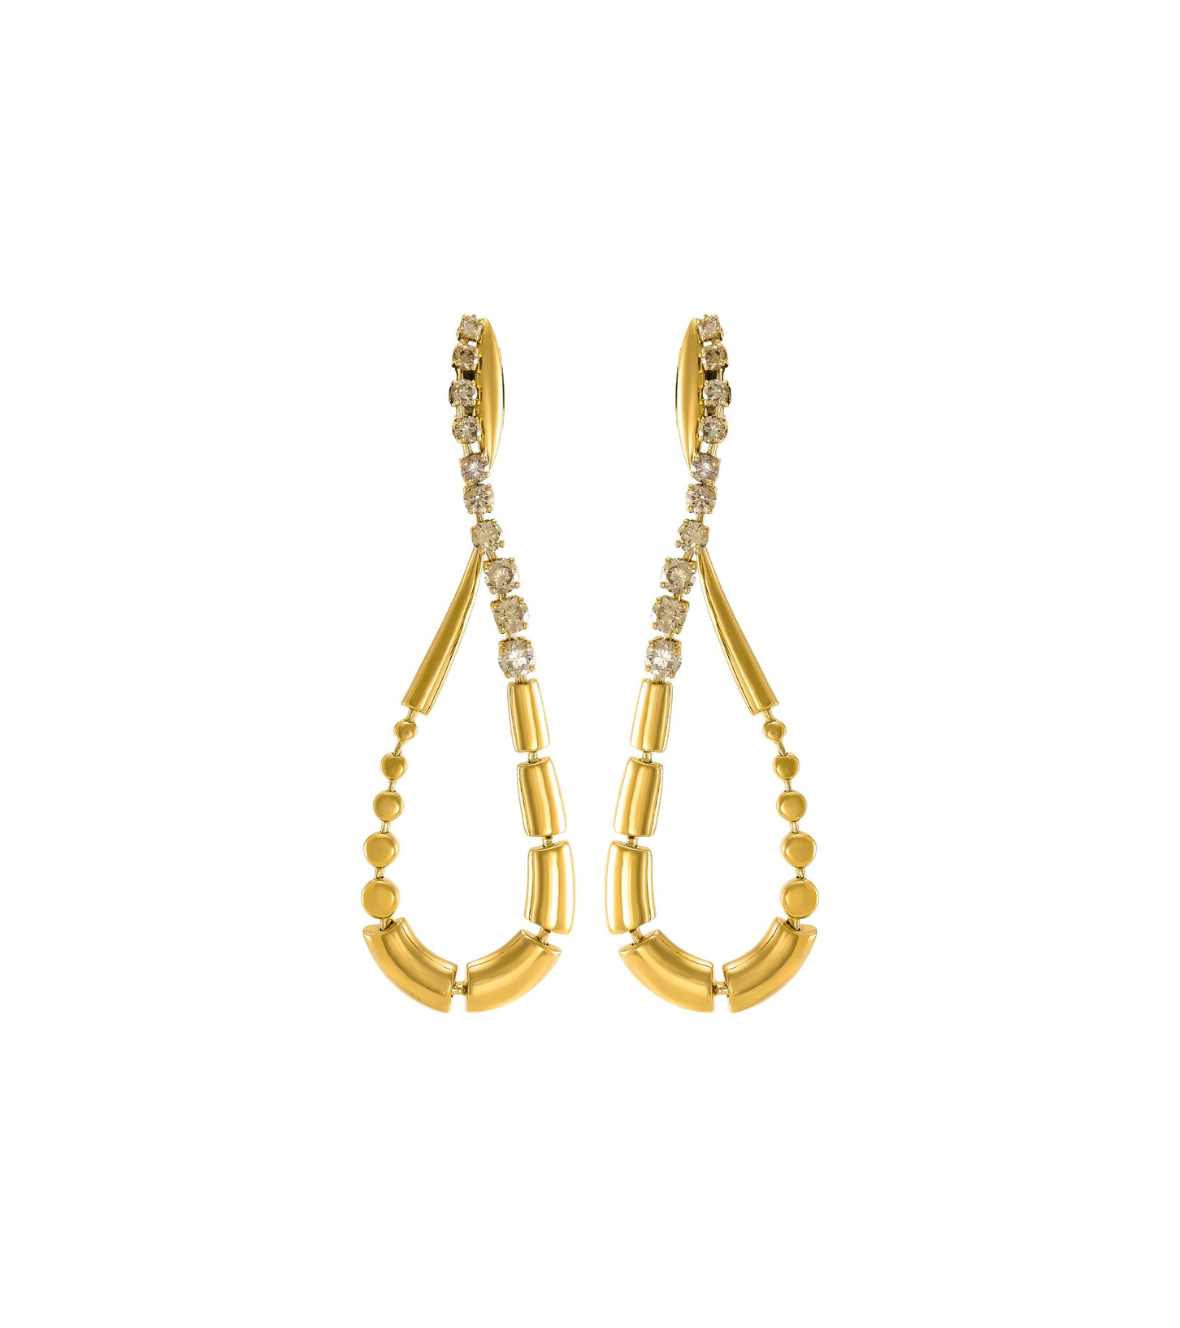 Yellow Gold Earrings with Brown Diamonds by Etho Maria